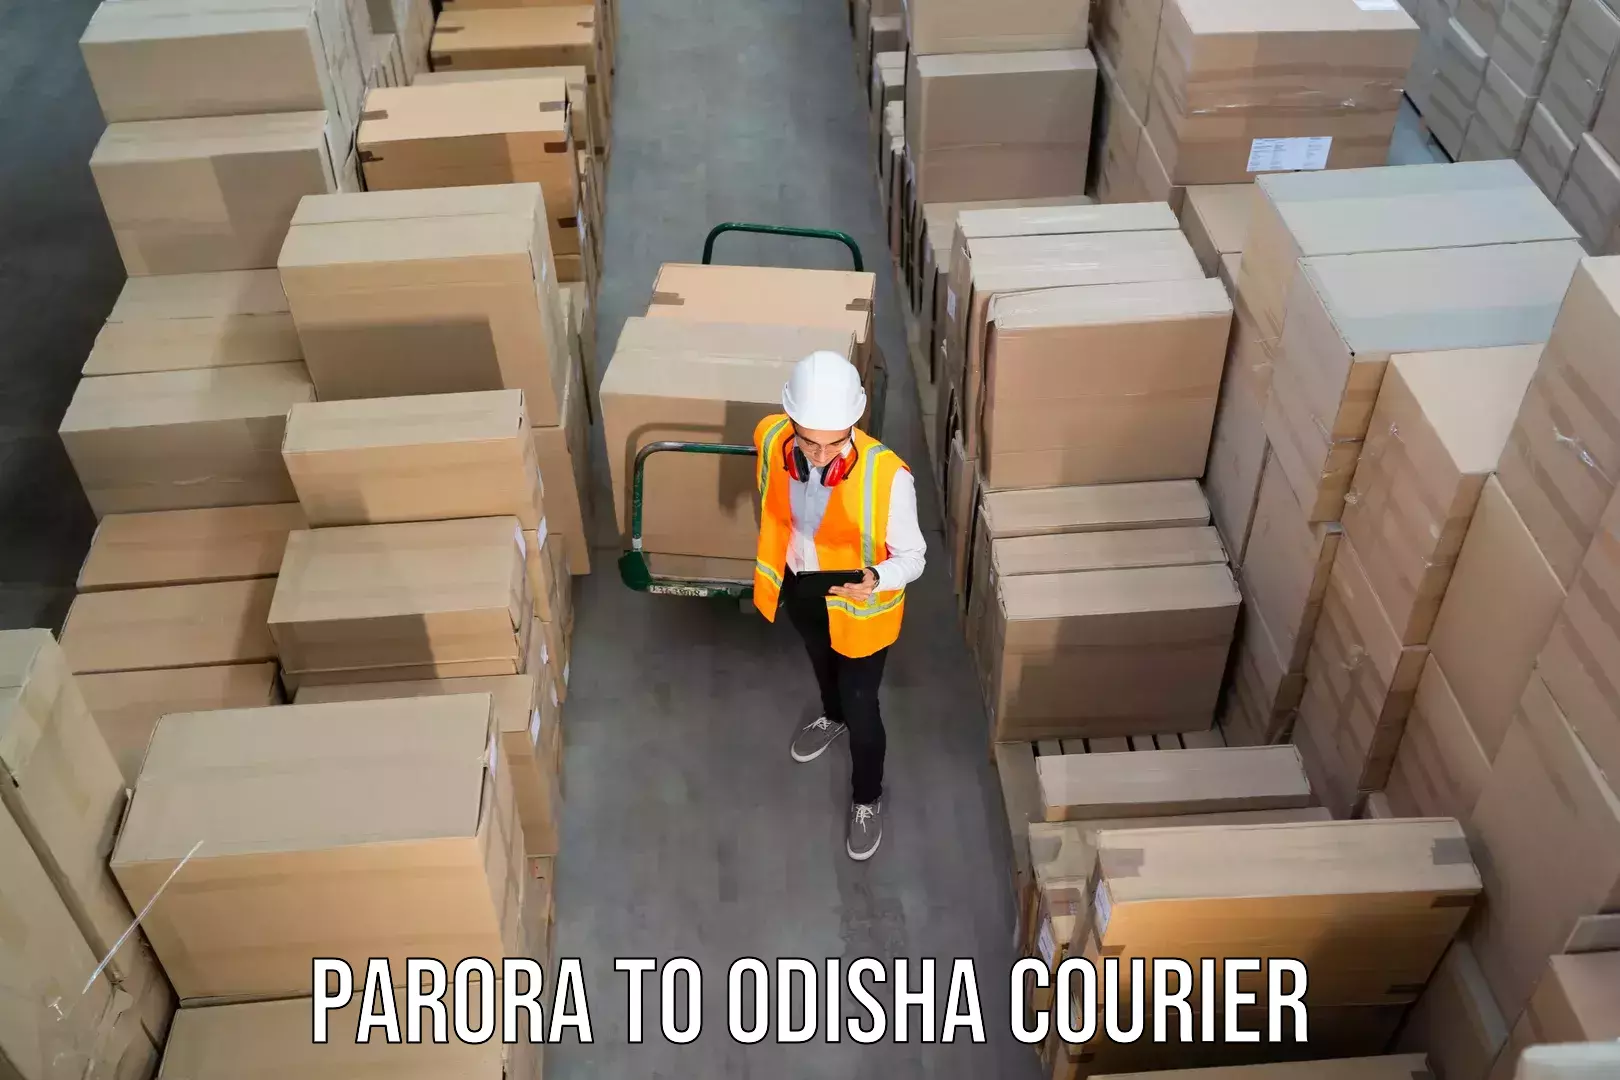 Automated shipping processes Parora to Loisingha